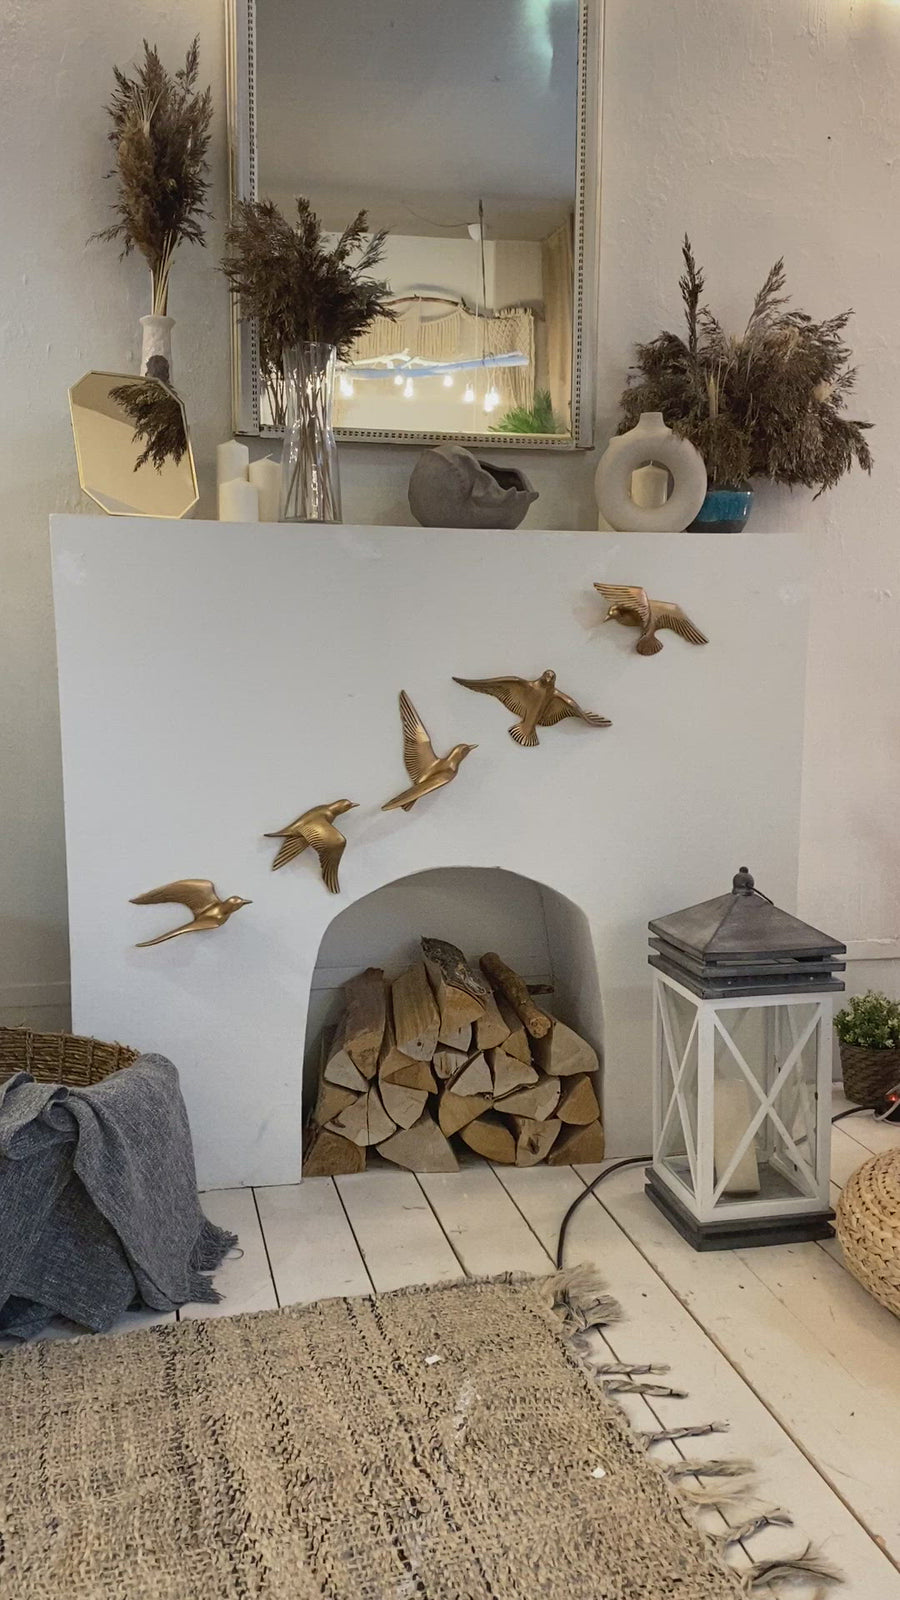 Seagulls Wall Decor in Gold